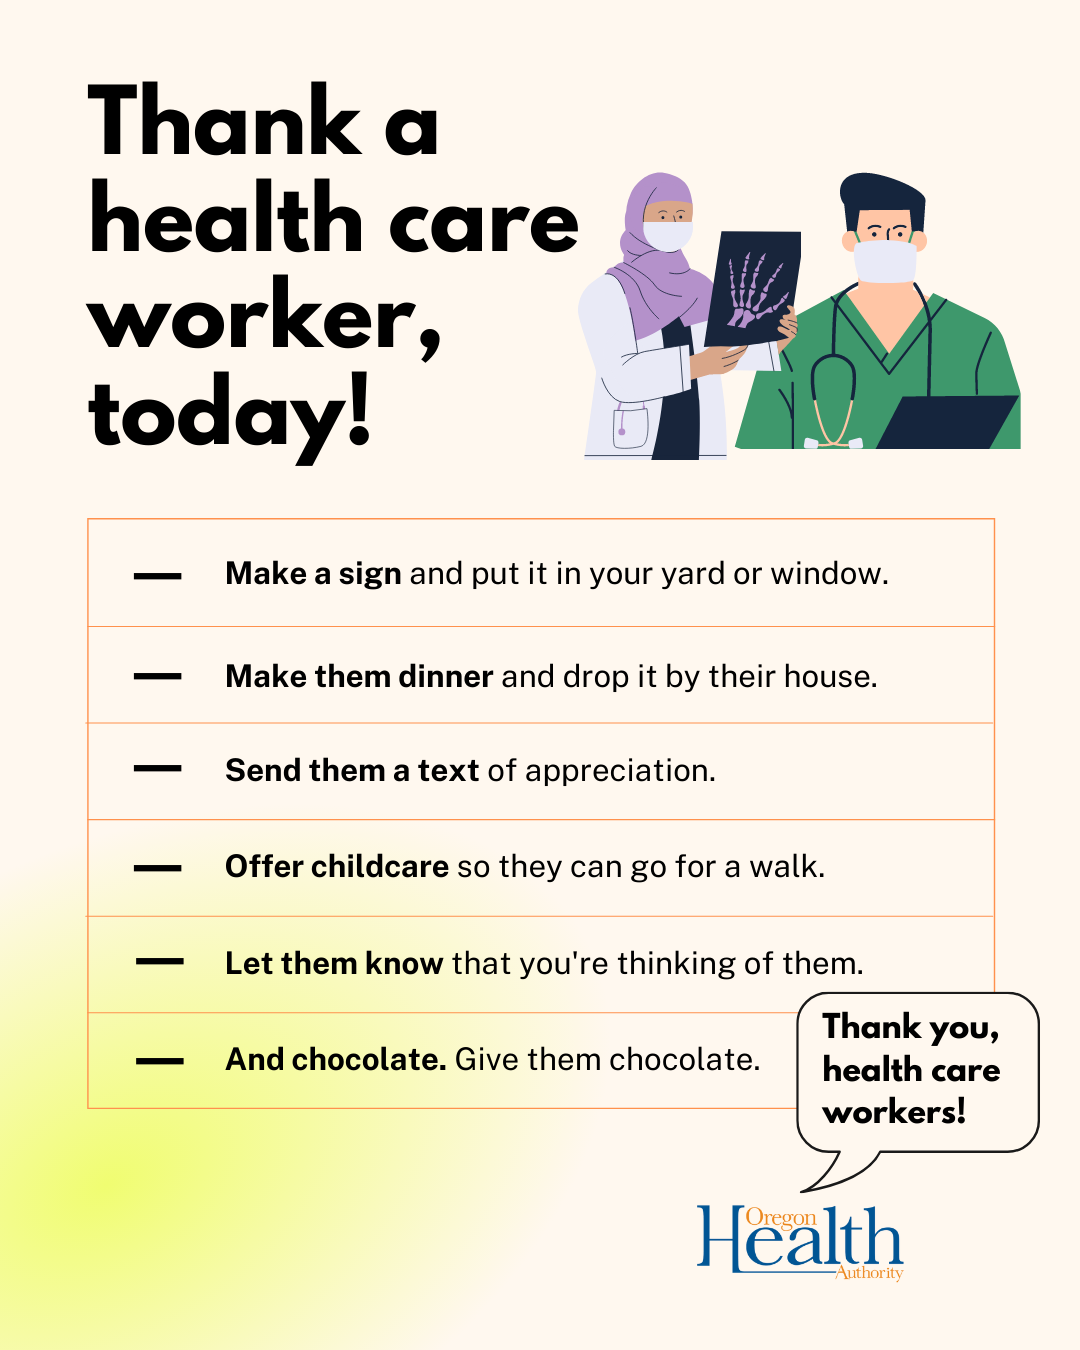 Thank health care workers with a sign, make them dinner, send a text, offer childcare, give them chocolate.